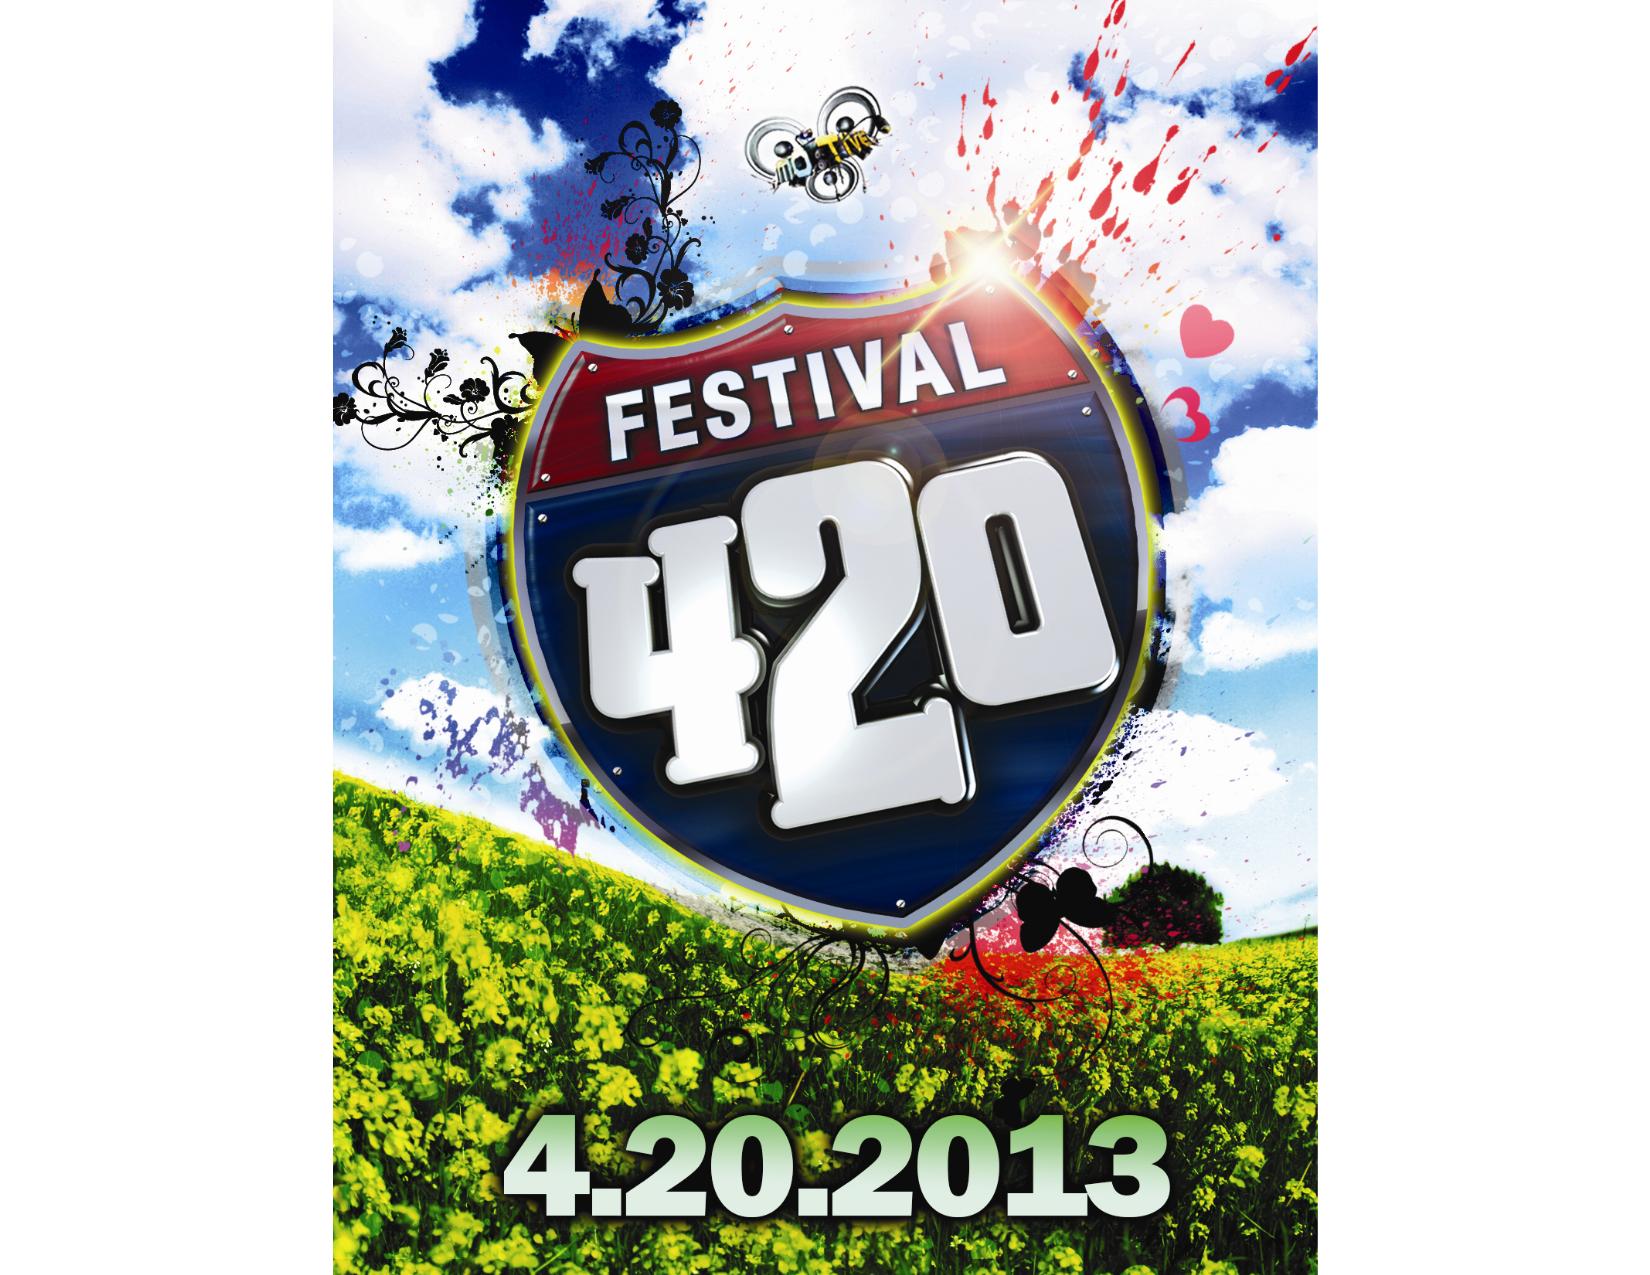 The 420 Festival Tickets The Belasco Theater and Ballrooms on April